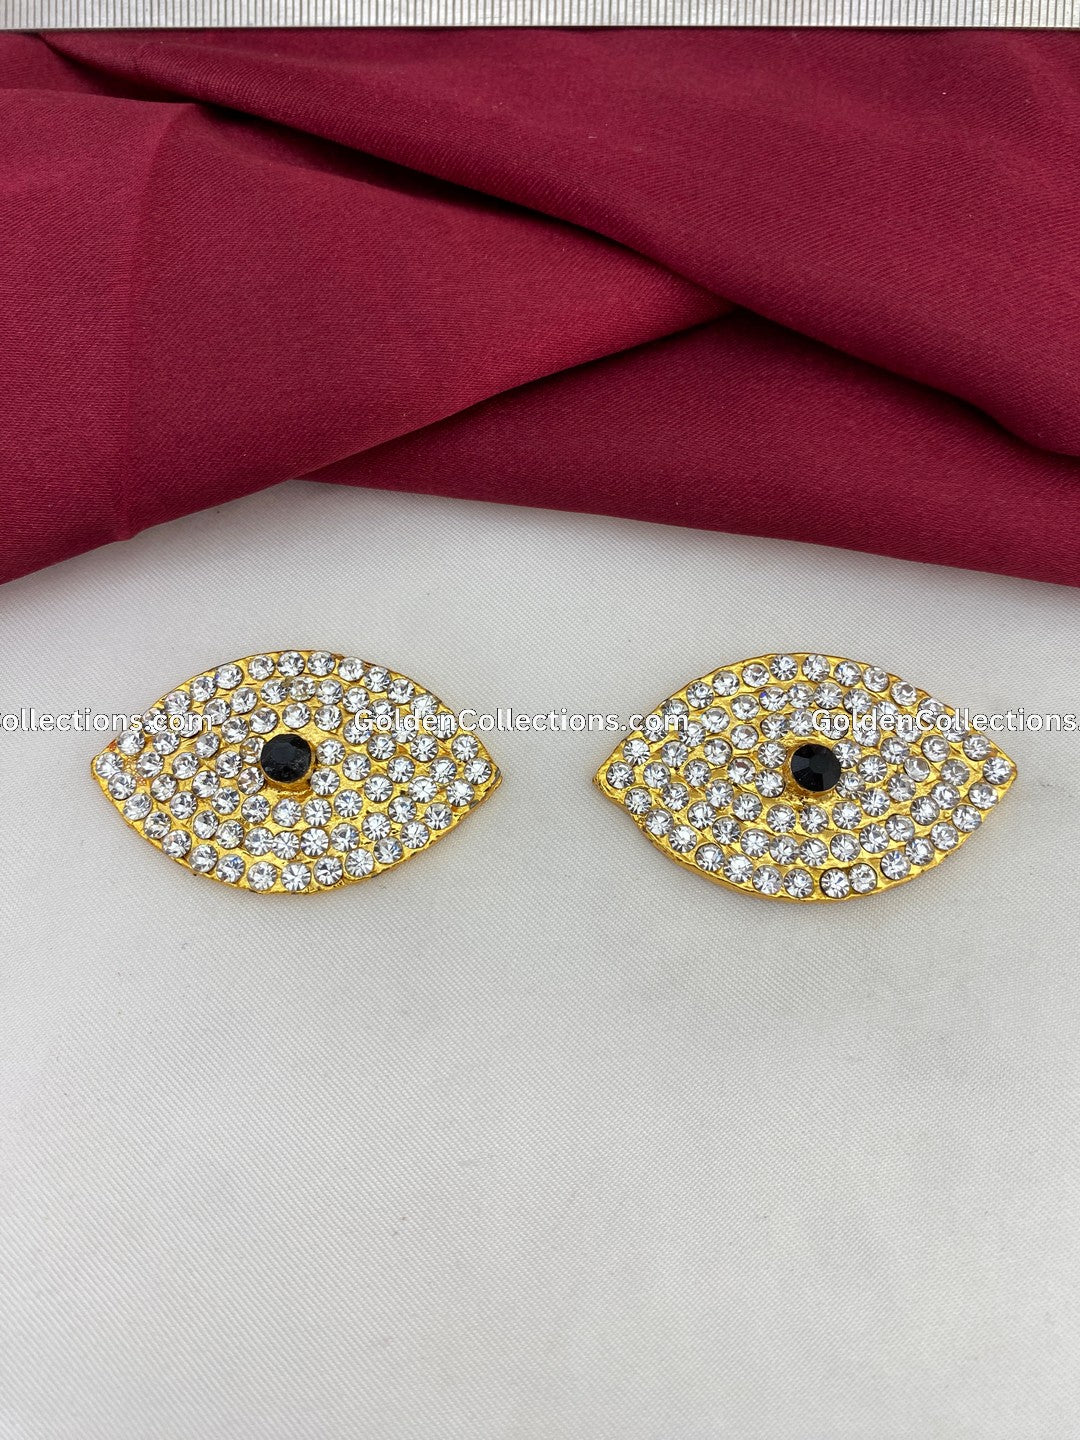 Nayan Deity Ornament - Divine Eye Ornaments - GoldenCollections DNC-006